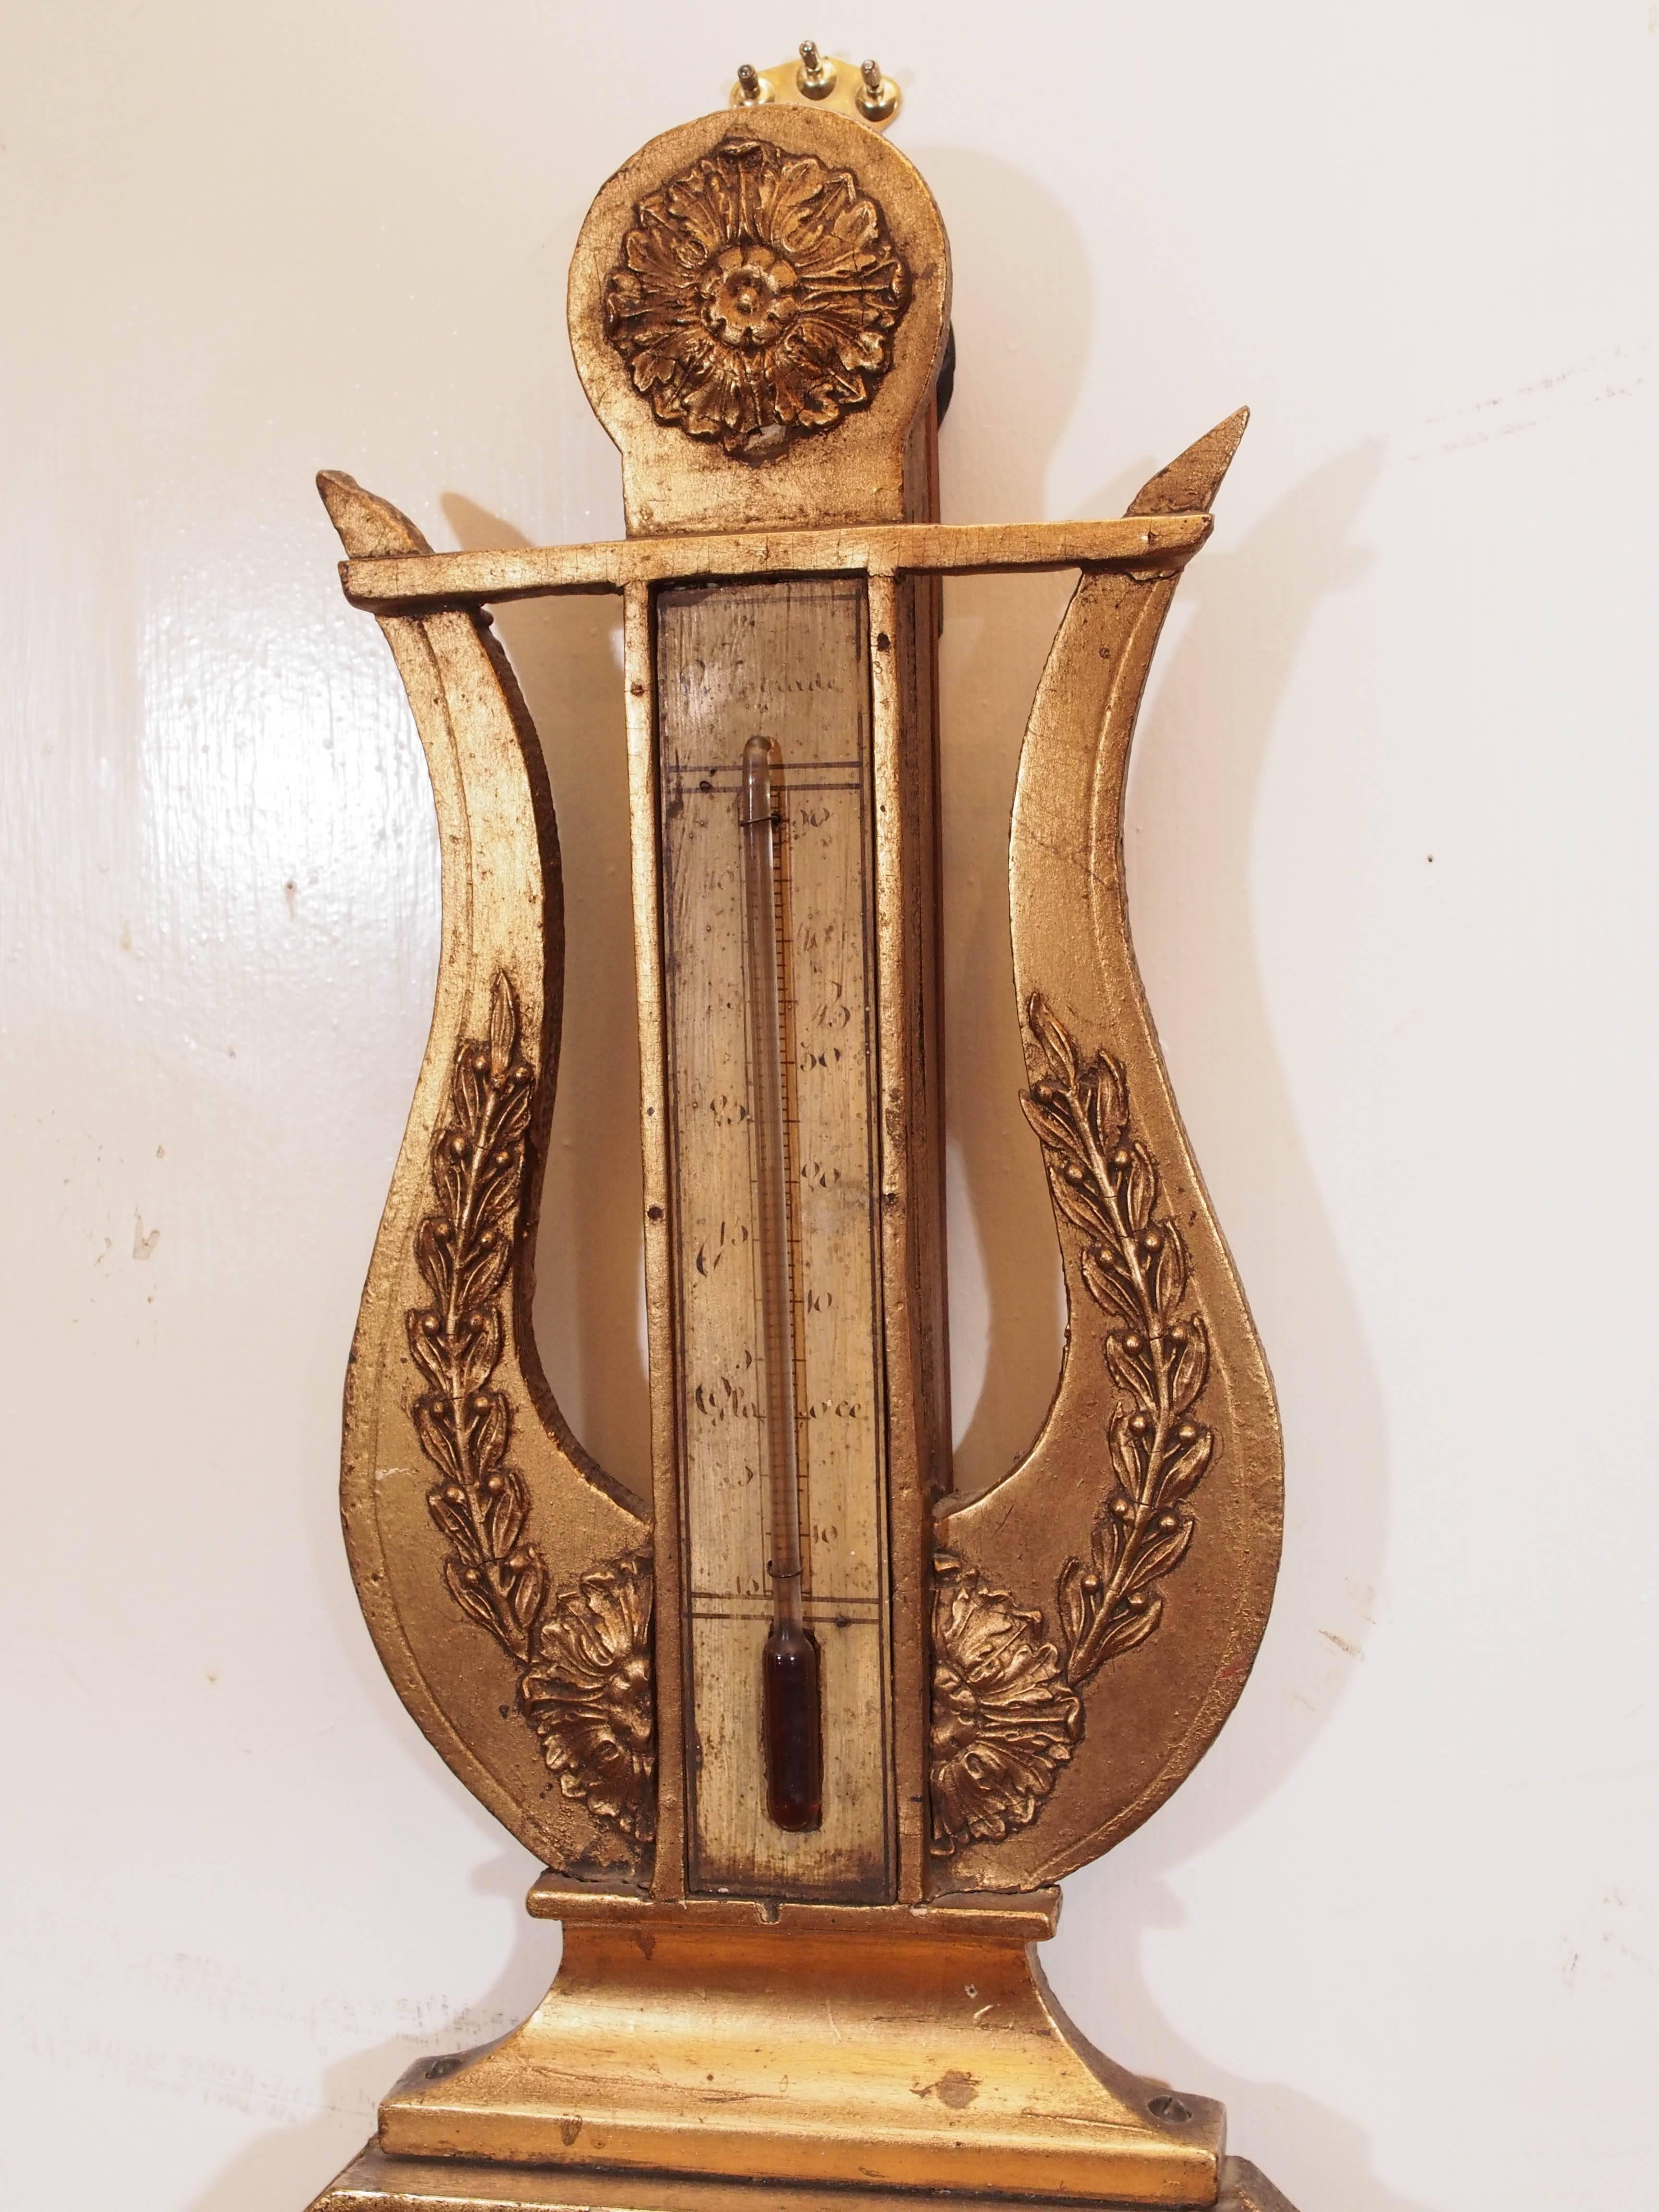 French Empire giltwood barometer or thermometer with lyre form over a octagonal shape. 19th Century.